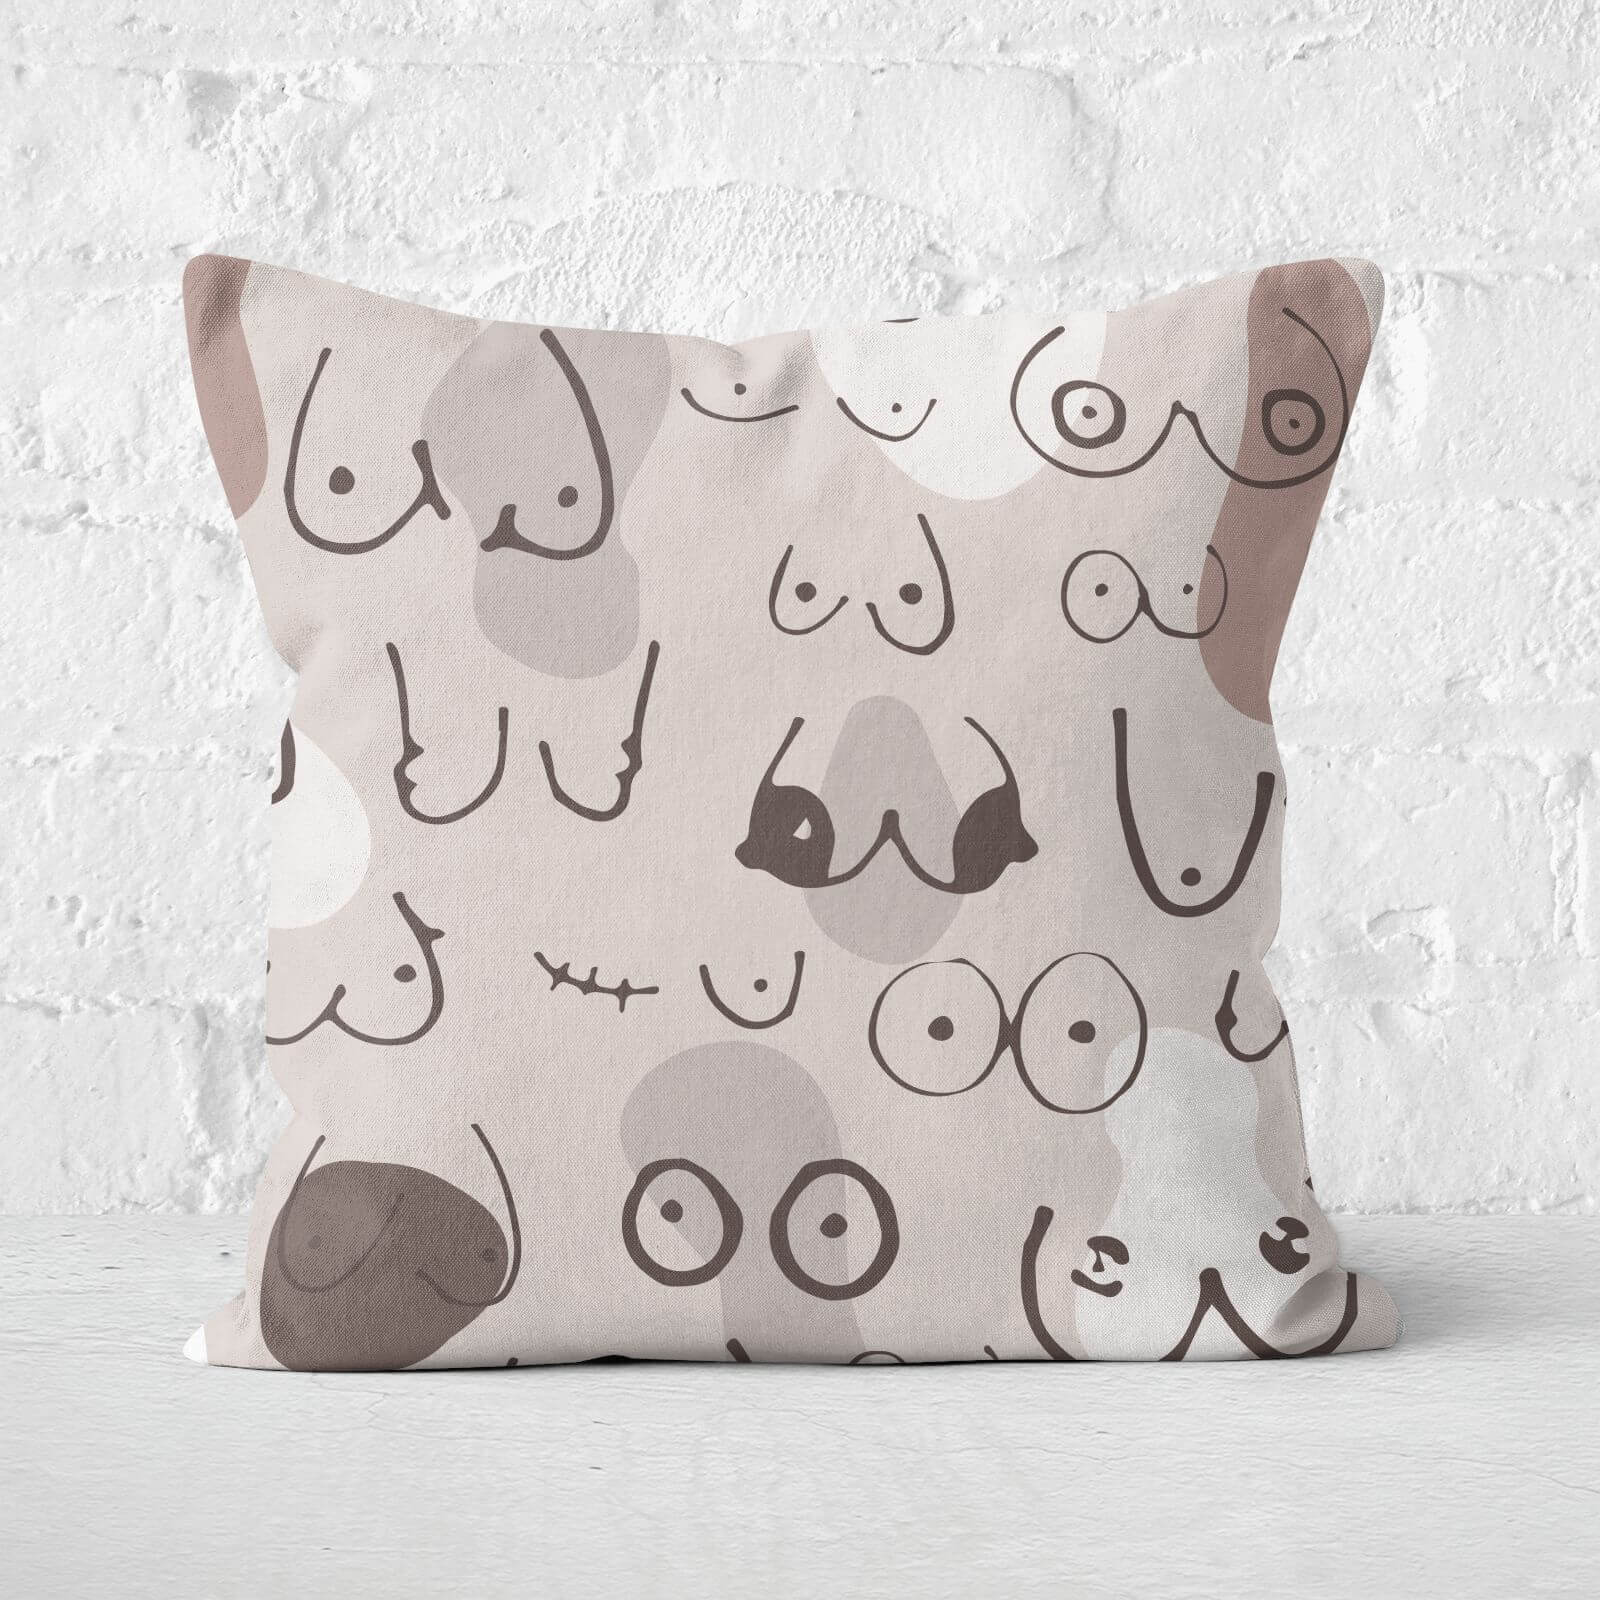 Love Your Shapes Square Cushion - 40x40cm - Soft Touch